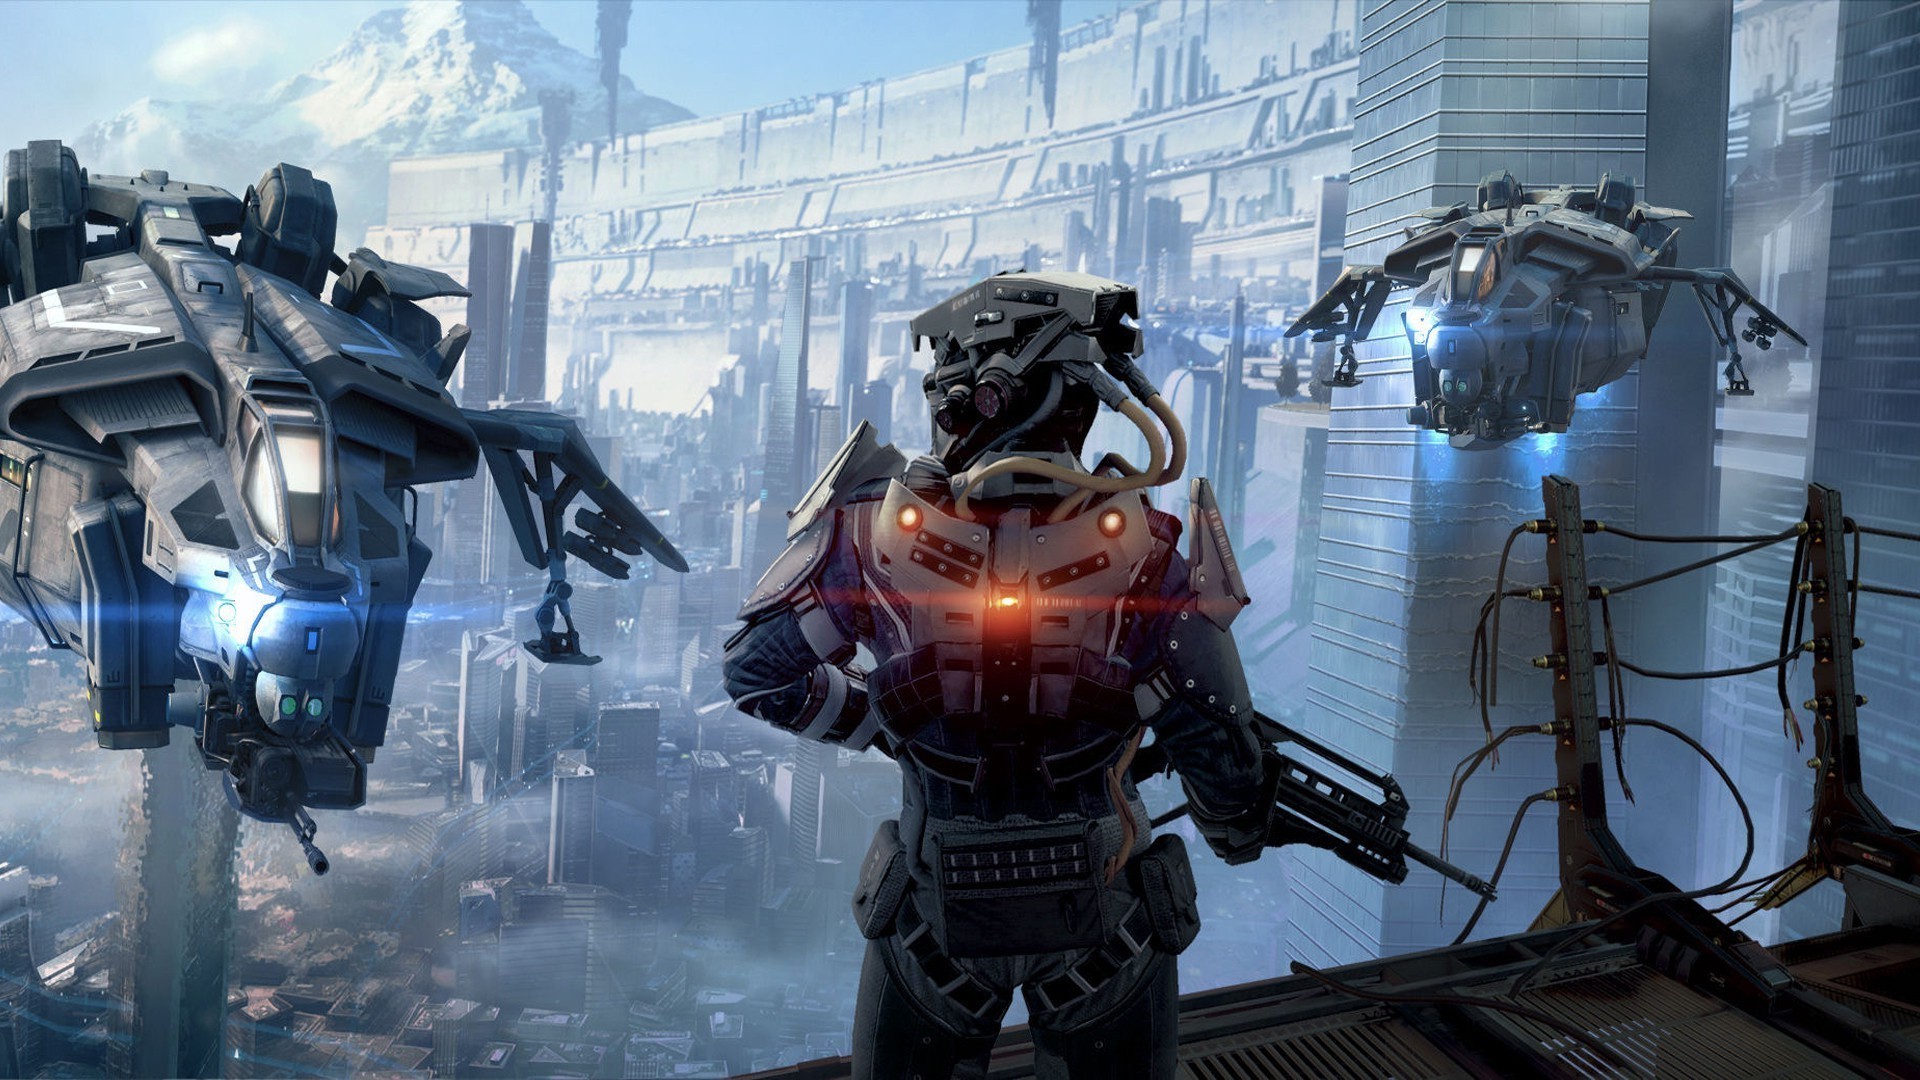 1920x1080 Fine Killzone Shadow Fall Images & Wallpapers Archelaus Macci